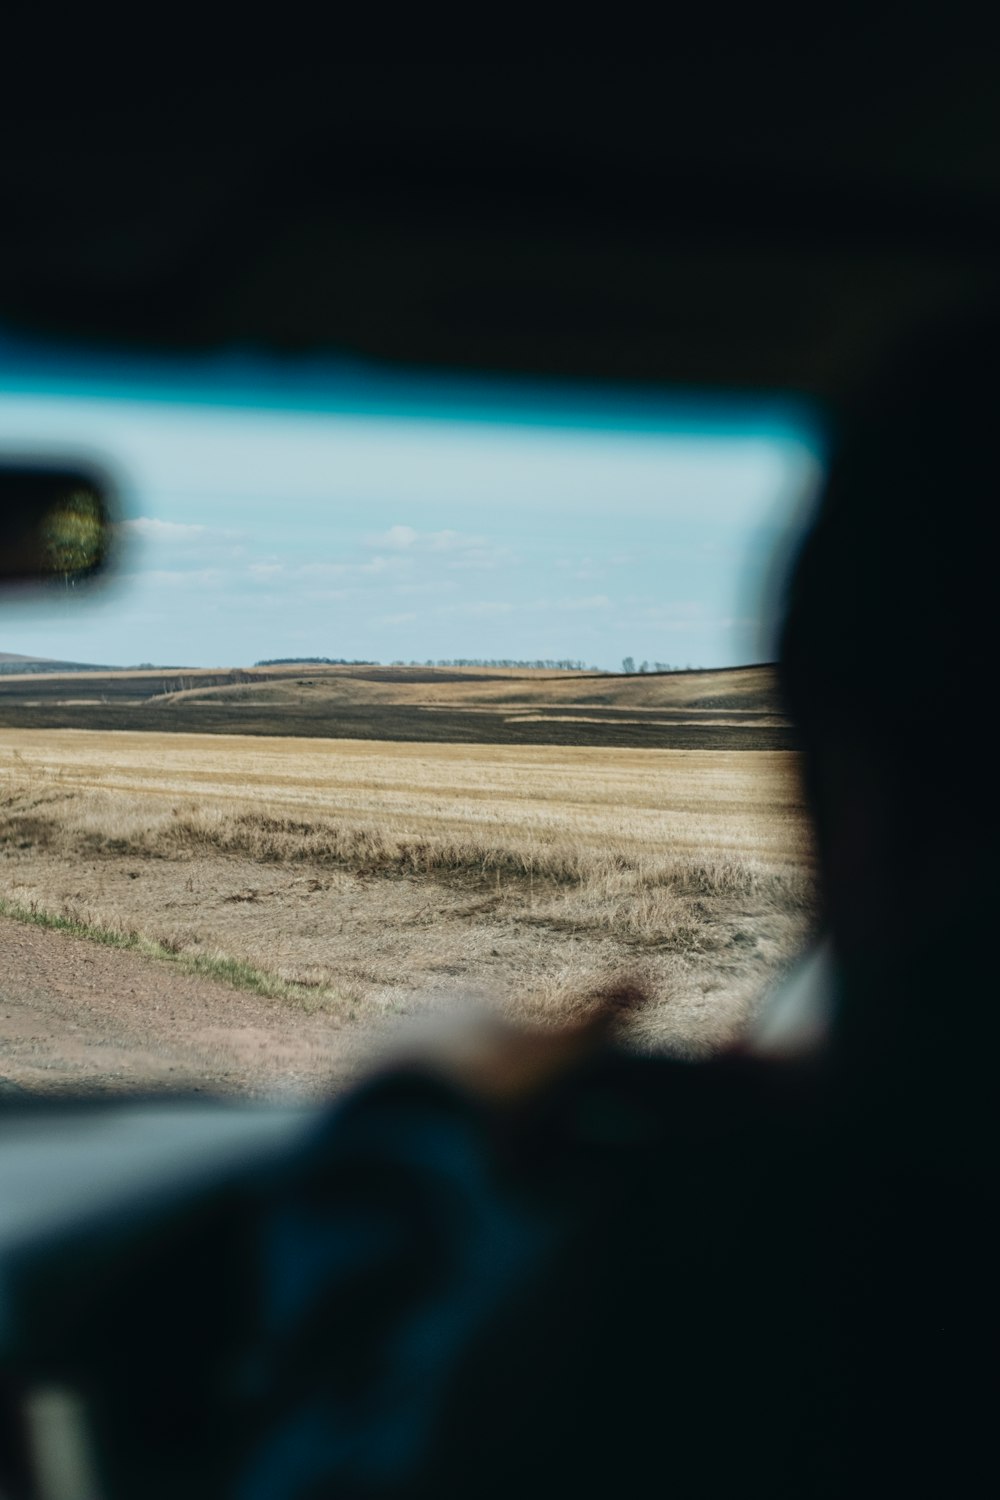 a view from inside a car of an open field